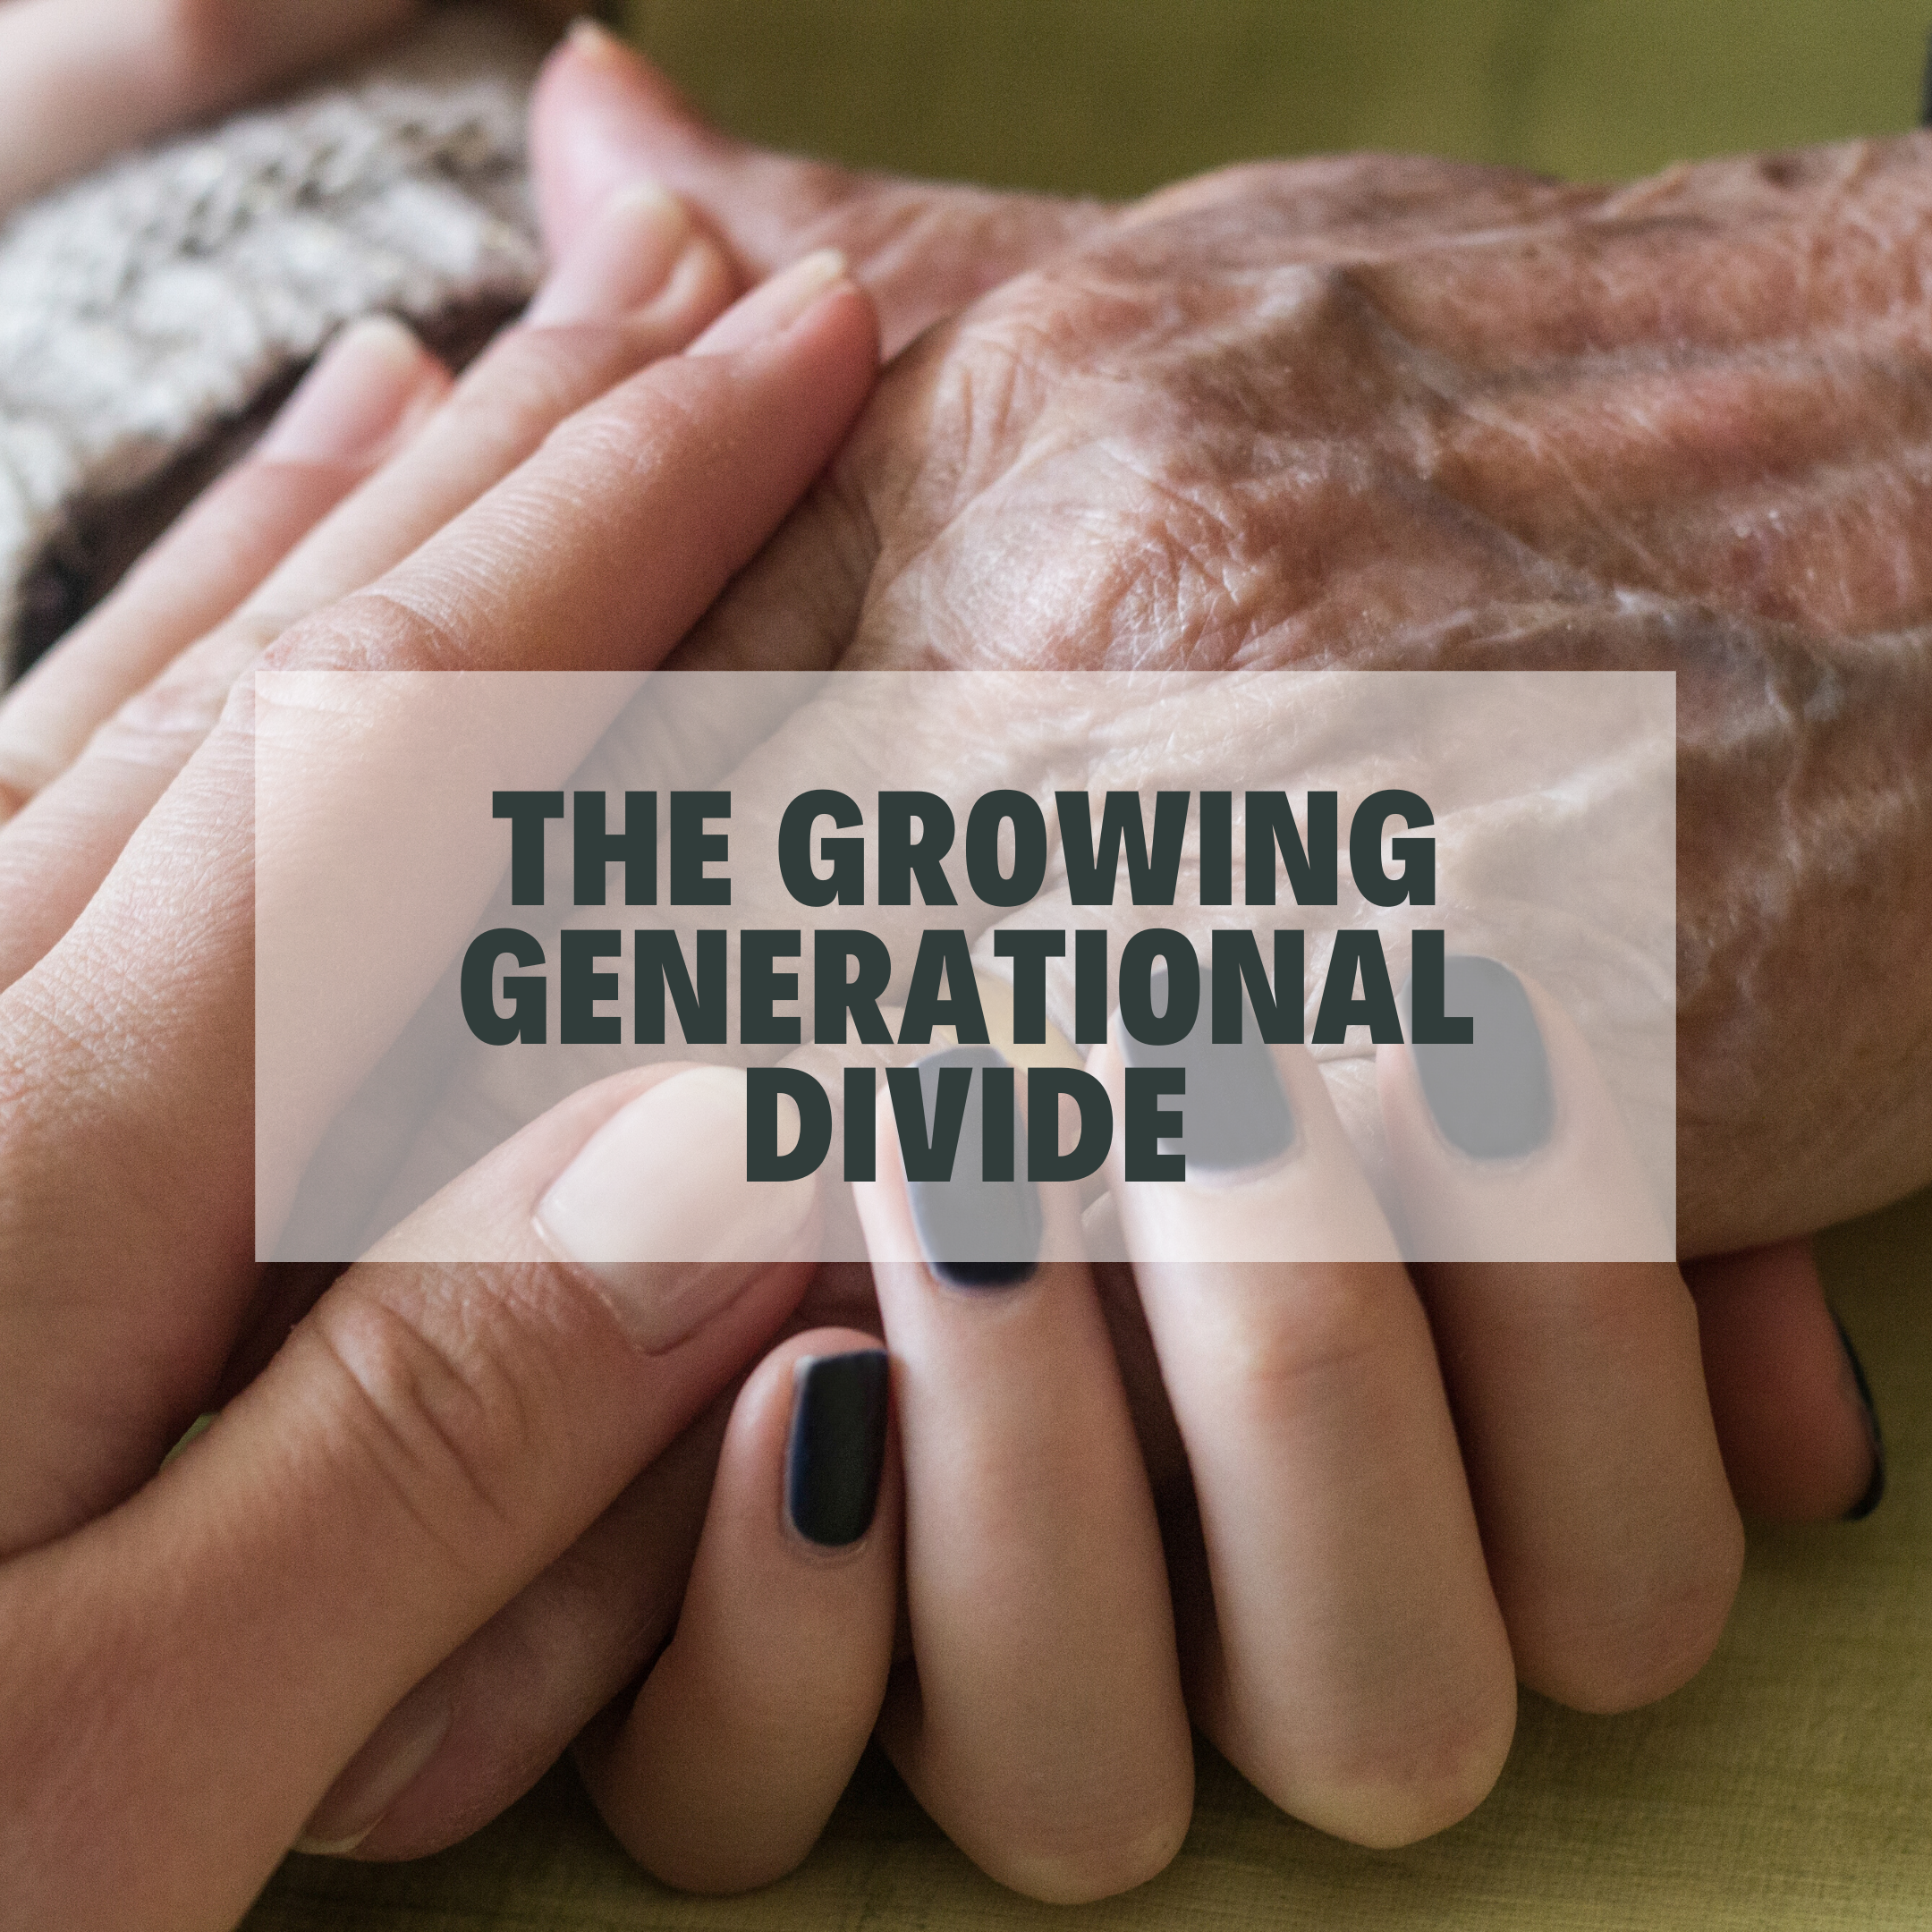 The Growing Generational Divide